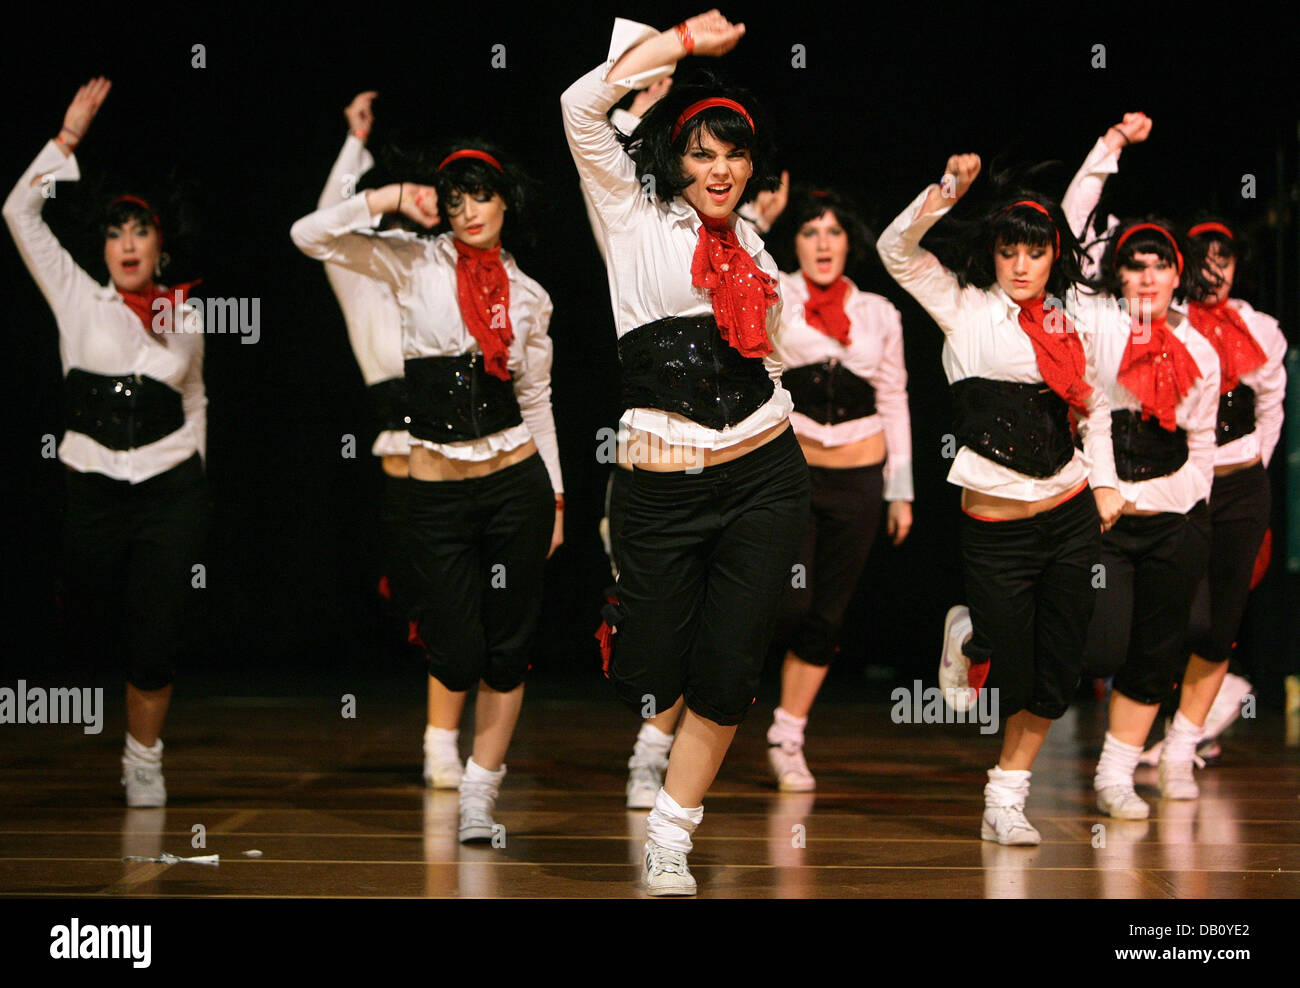 Slovenian dance 'Bolero - Symphony' performs at the HipHop World Championships at the Stadthalle in Bremen, Germany, 07 October 2007. The group won the in the Electric Boogie category.